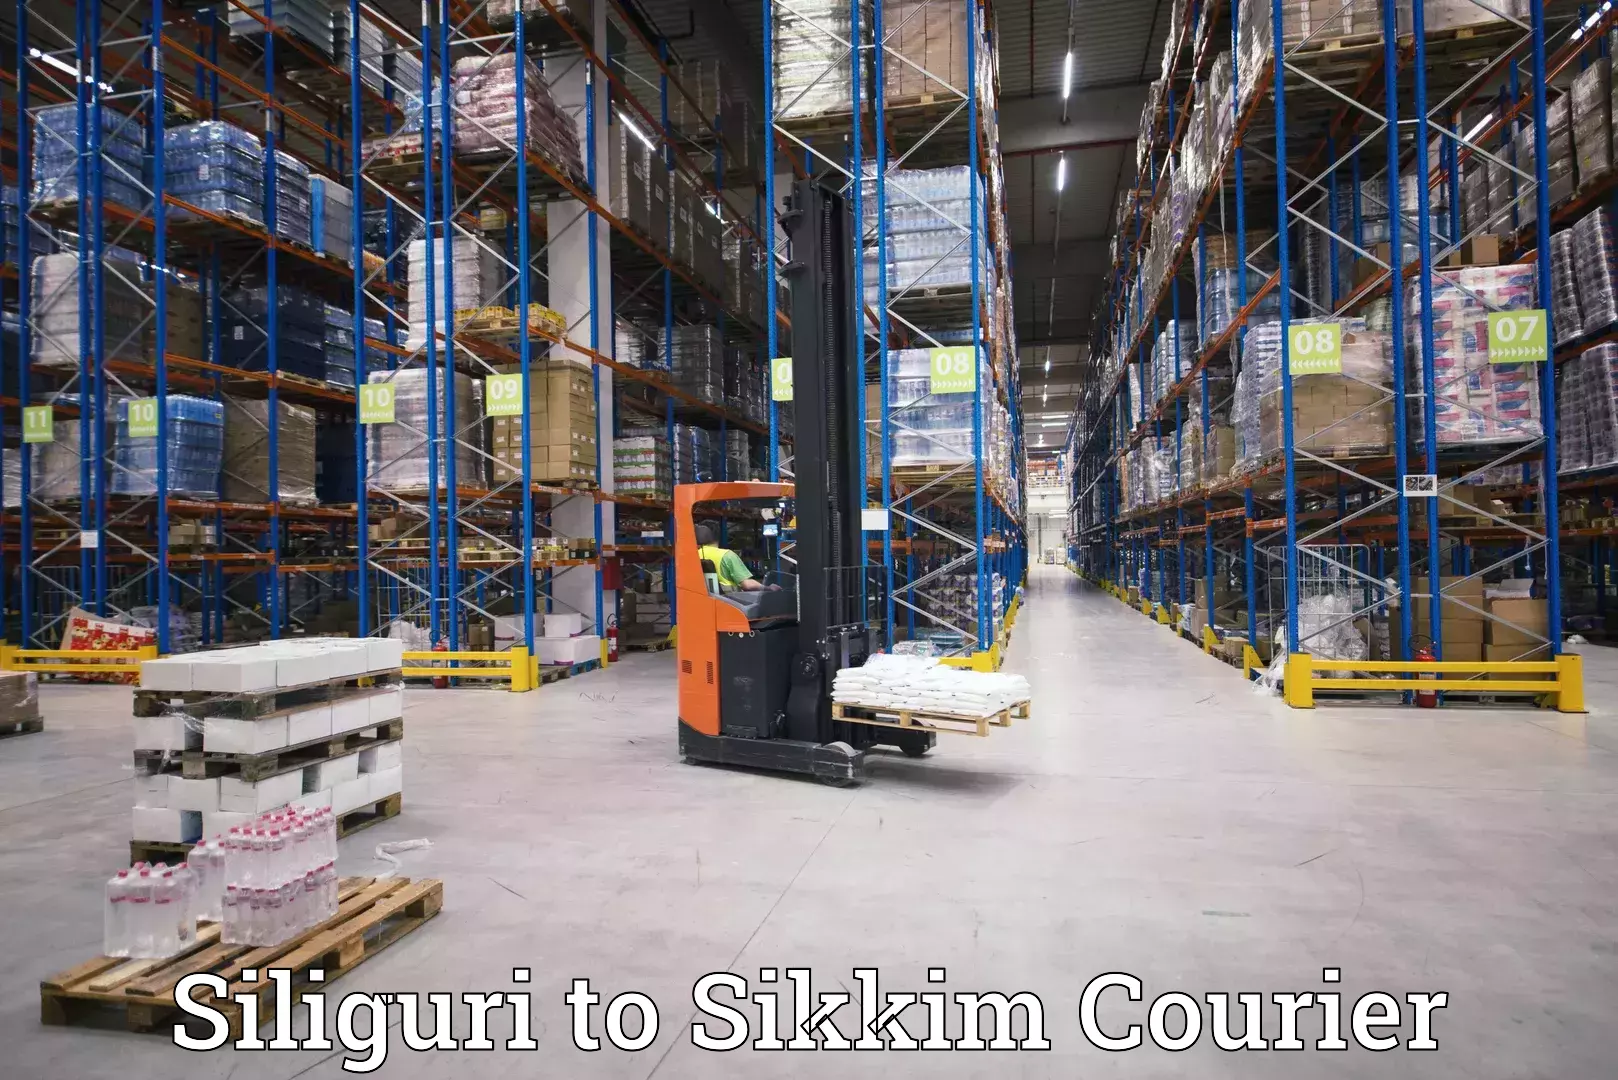 Courier service partnerships Siliguri to South Sikkim